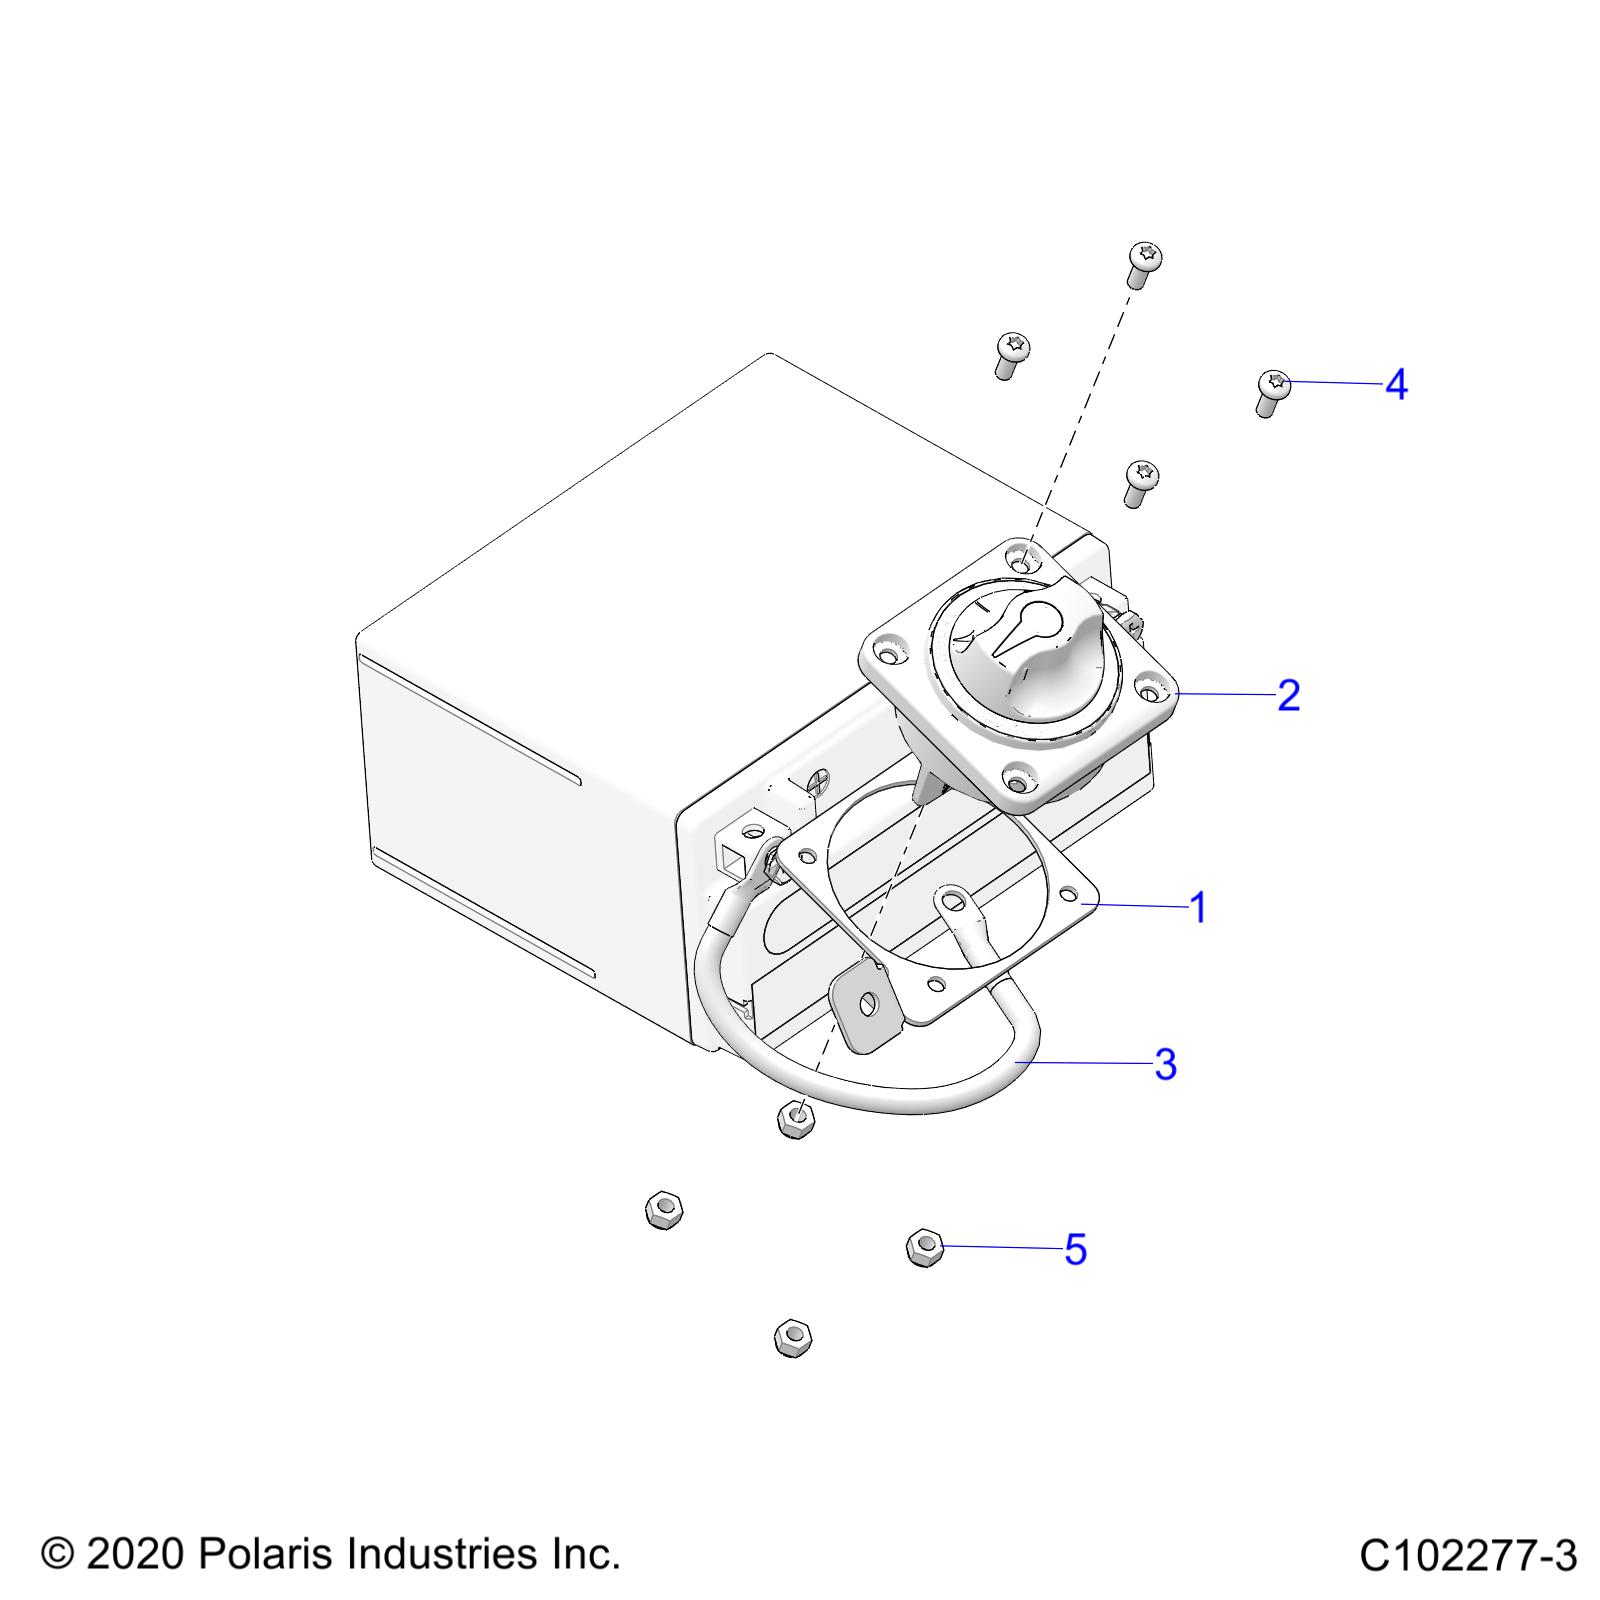 Part Number : 4016139 CABLE-BATTERY TO ISOLATOR